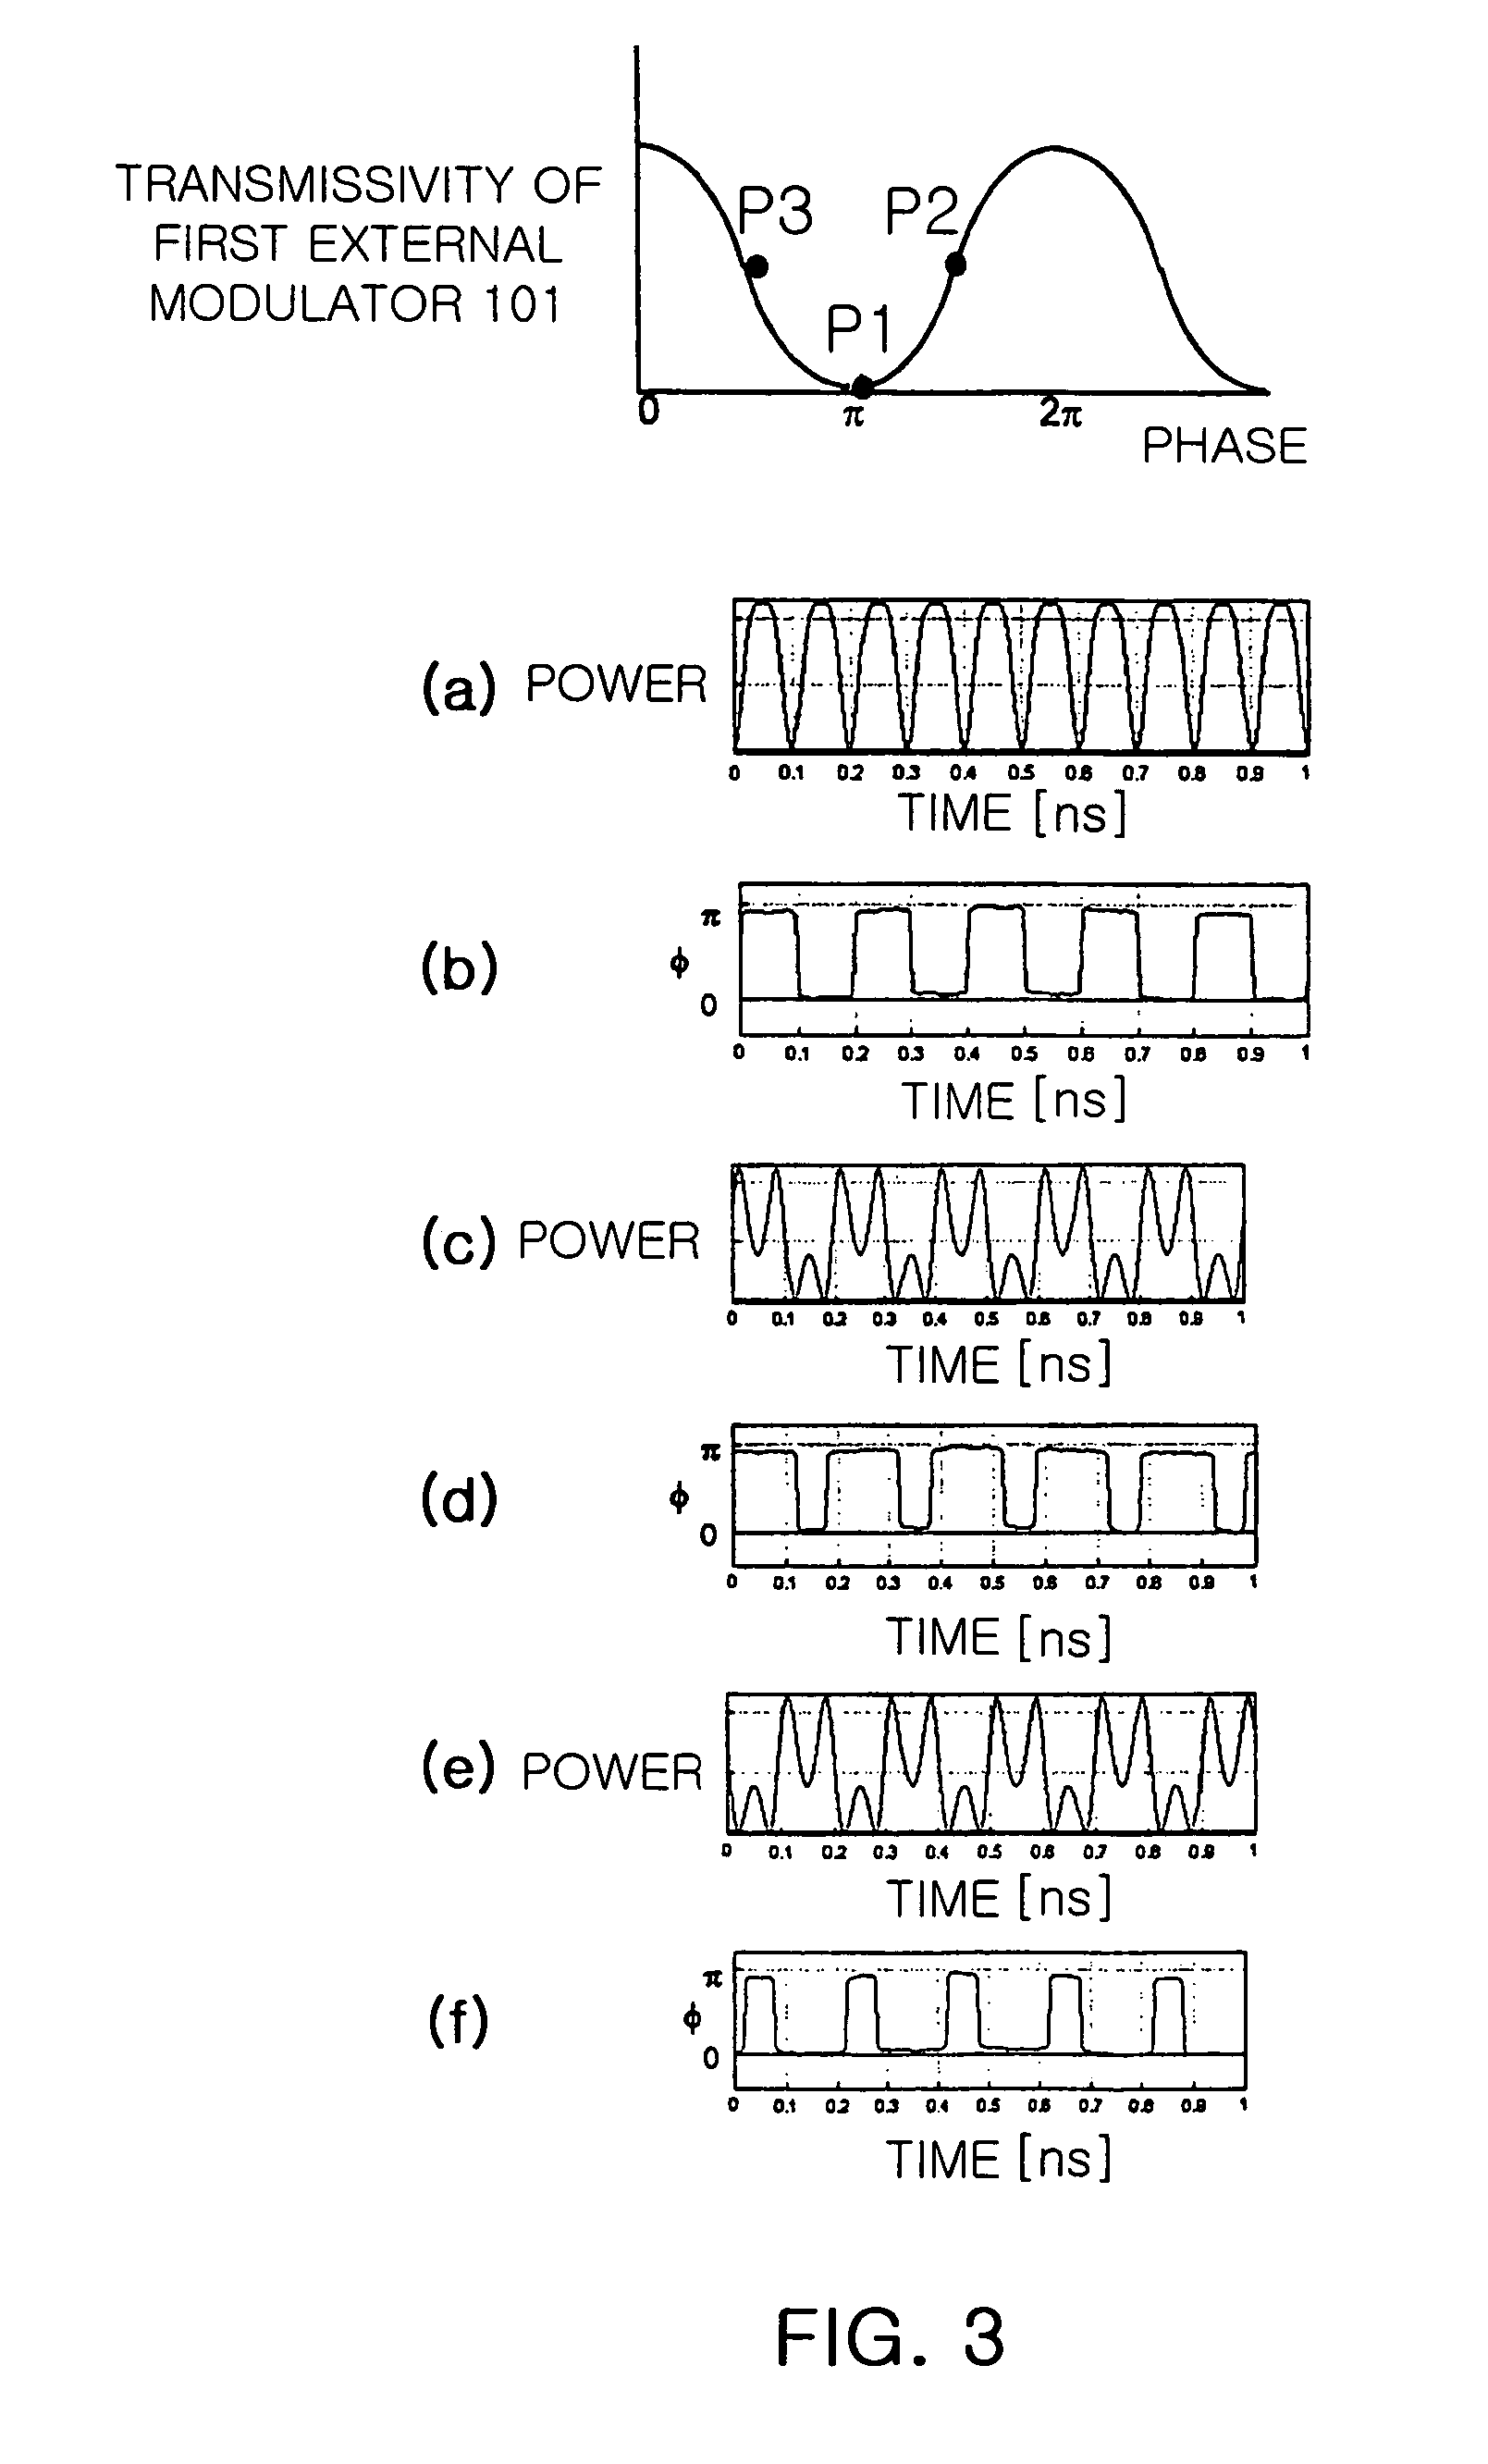 Apparatus and method for automatically correcting bias voltage for carrier suppressed pulse generating modulator